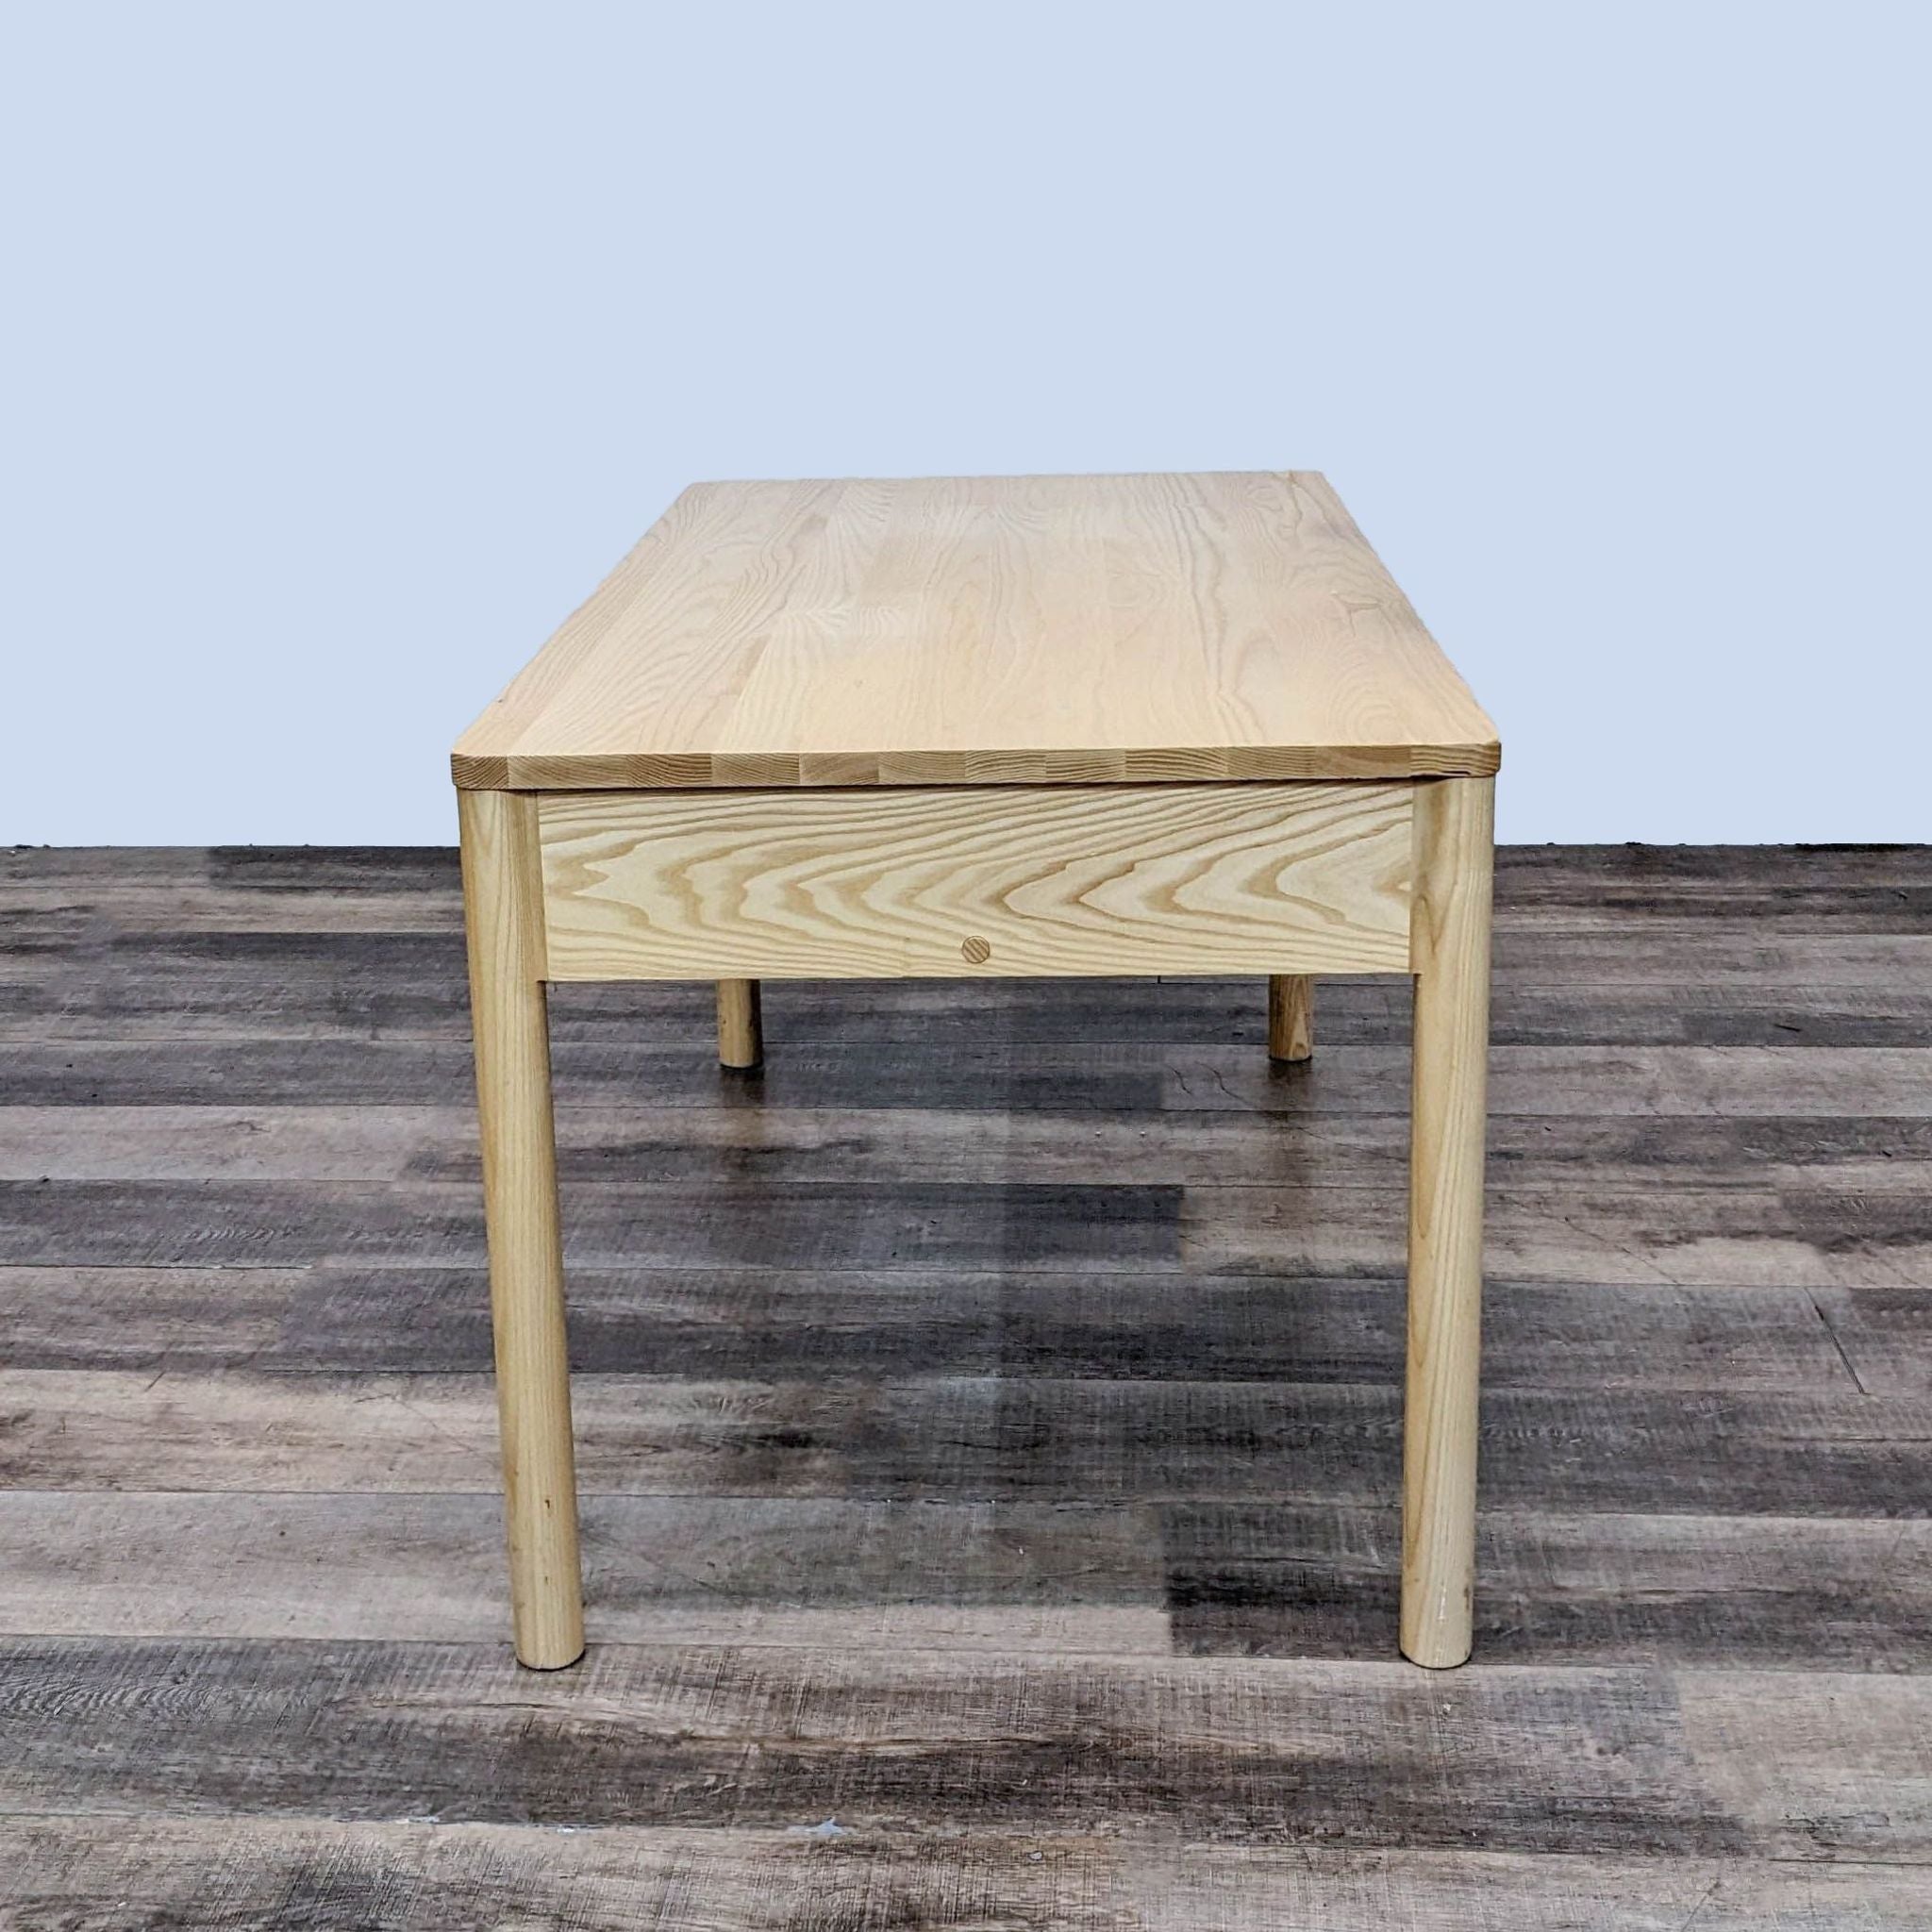 Frontal view of the MSDS Eave desk, highlighting the wood grain texture on a dark flooring background.